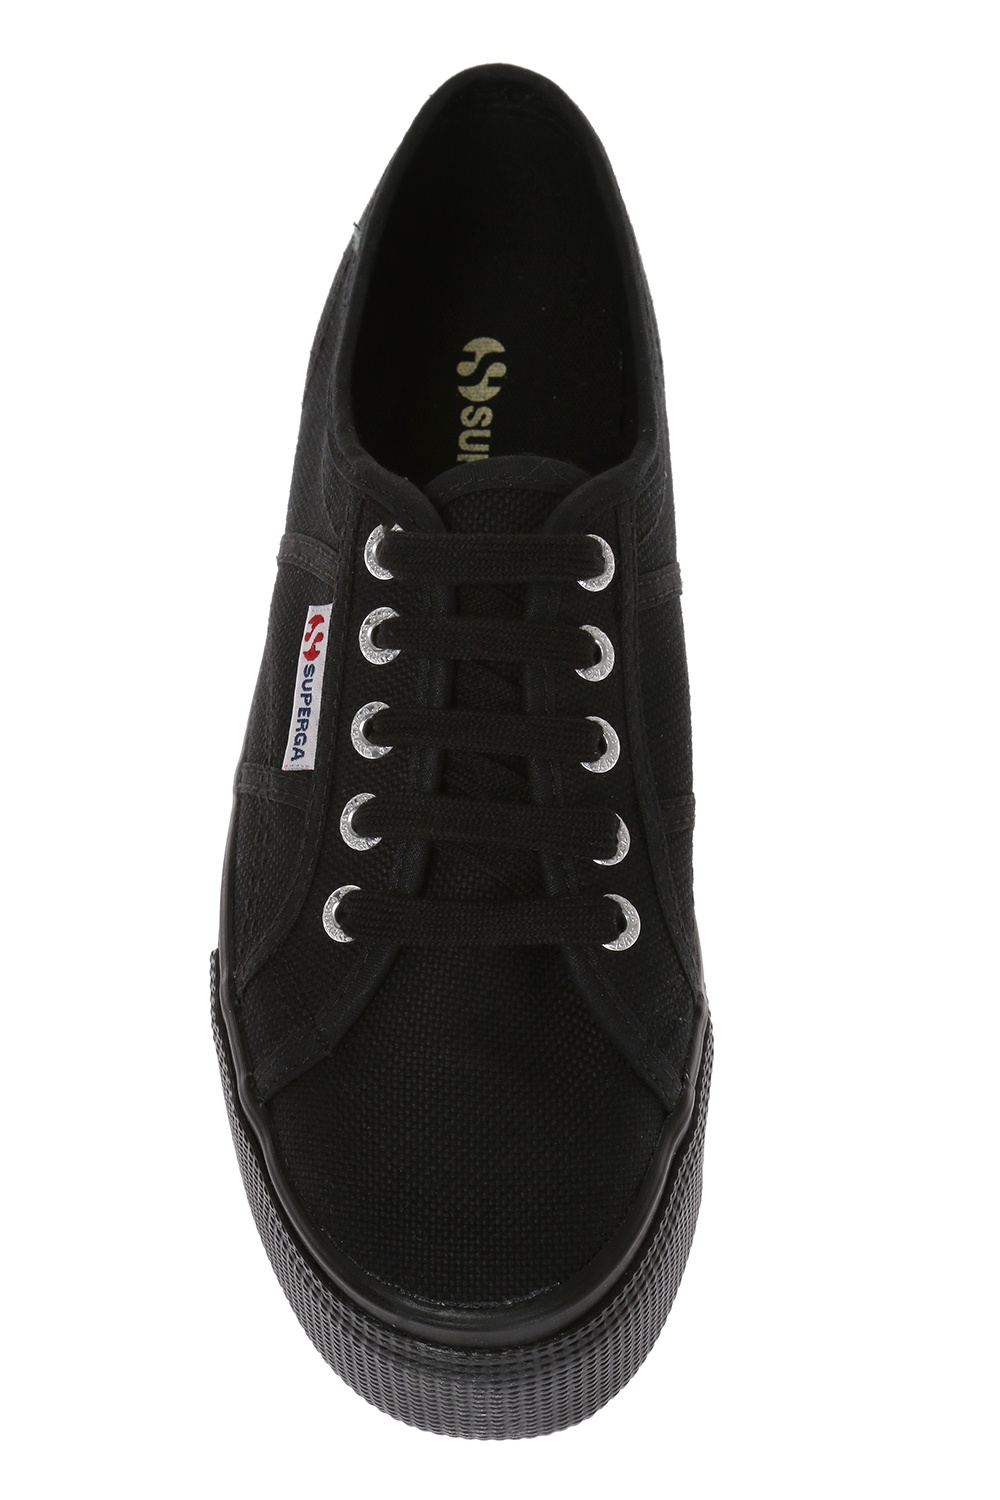 superga linea up and down black